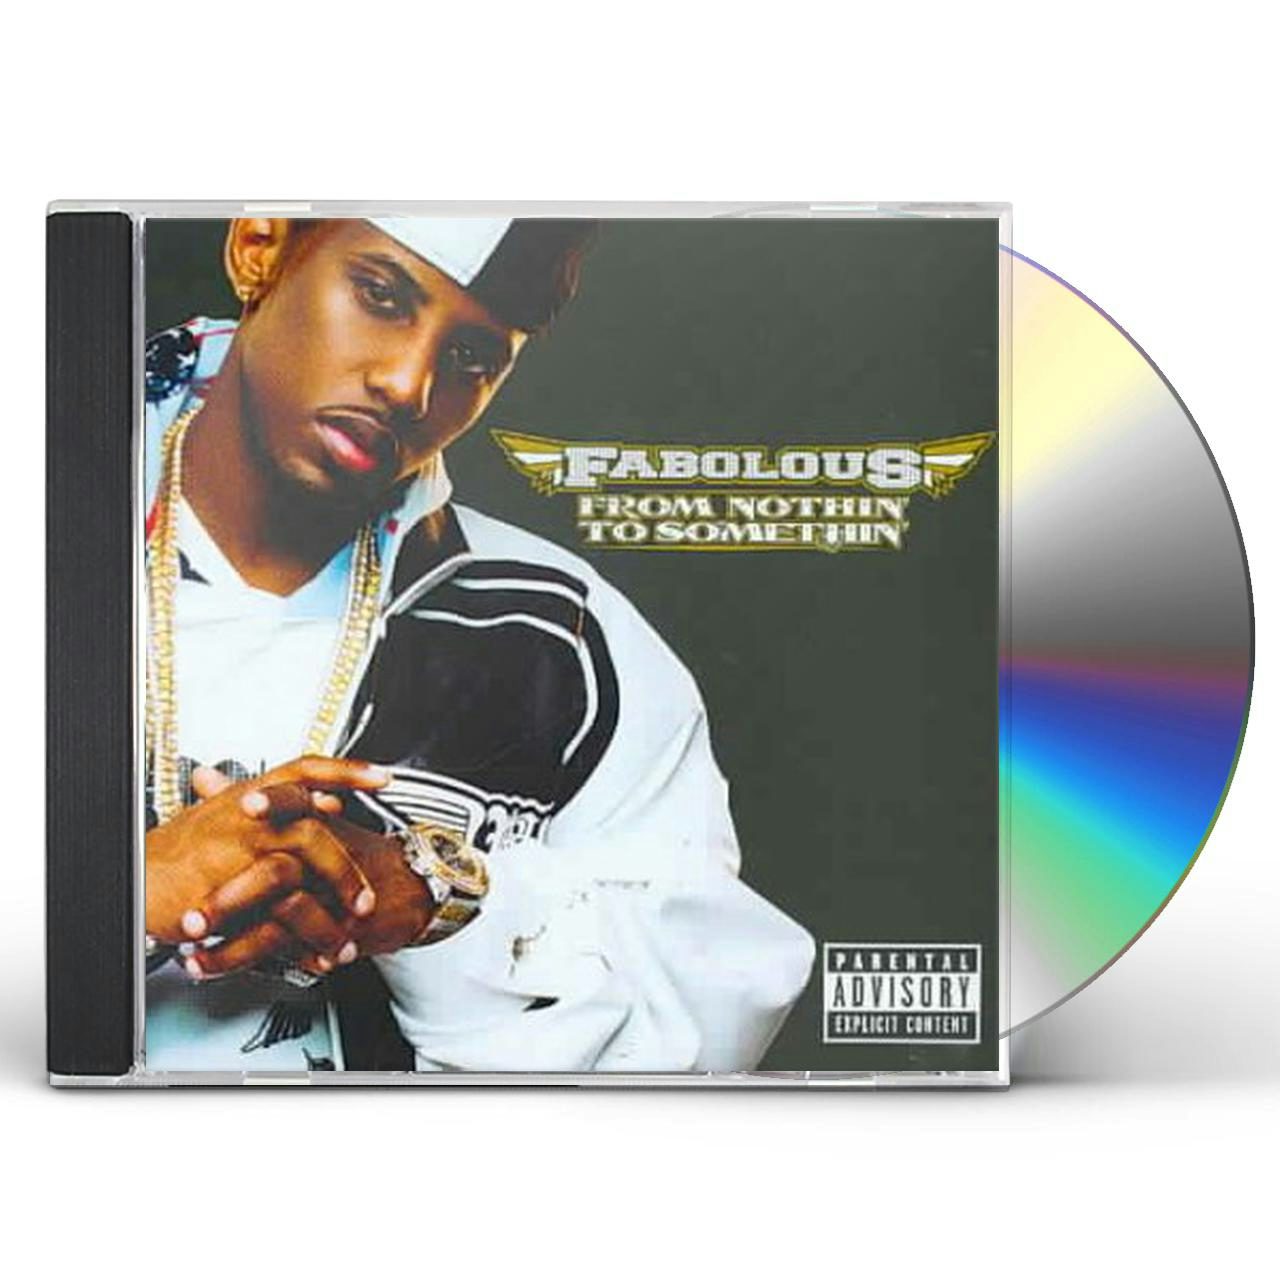 Fabolous FROM NOTHIN TO SOMETHIN CD